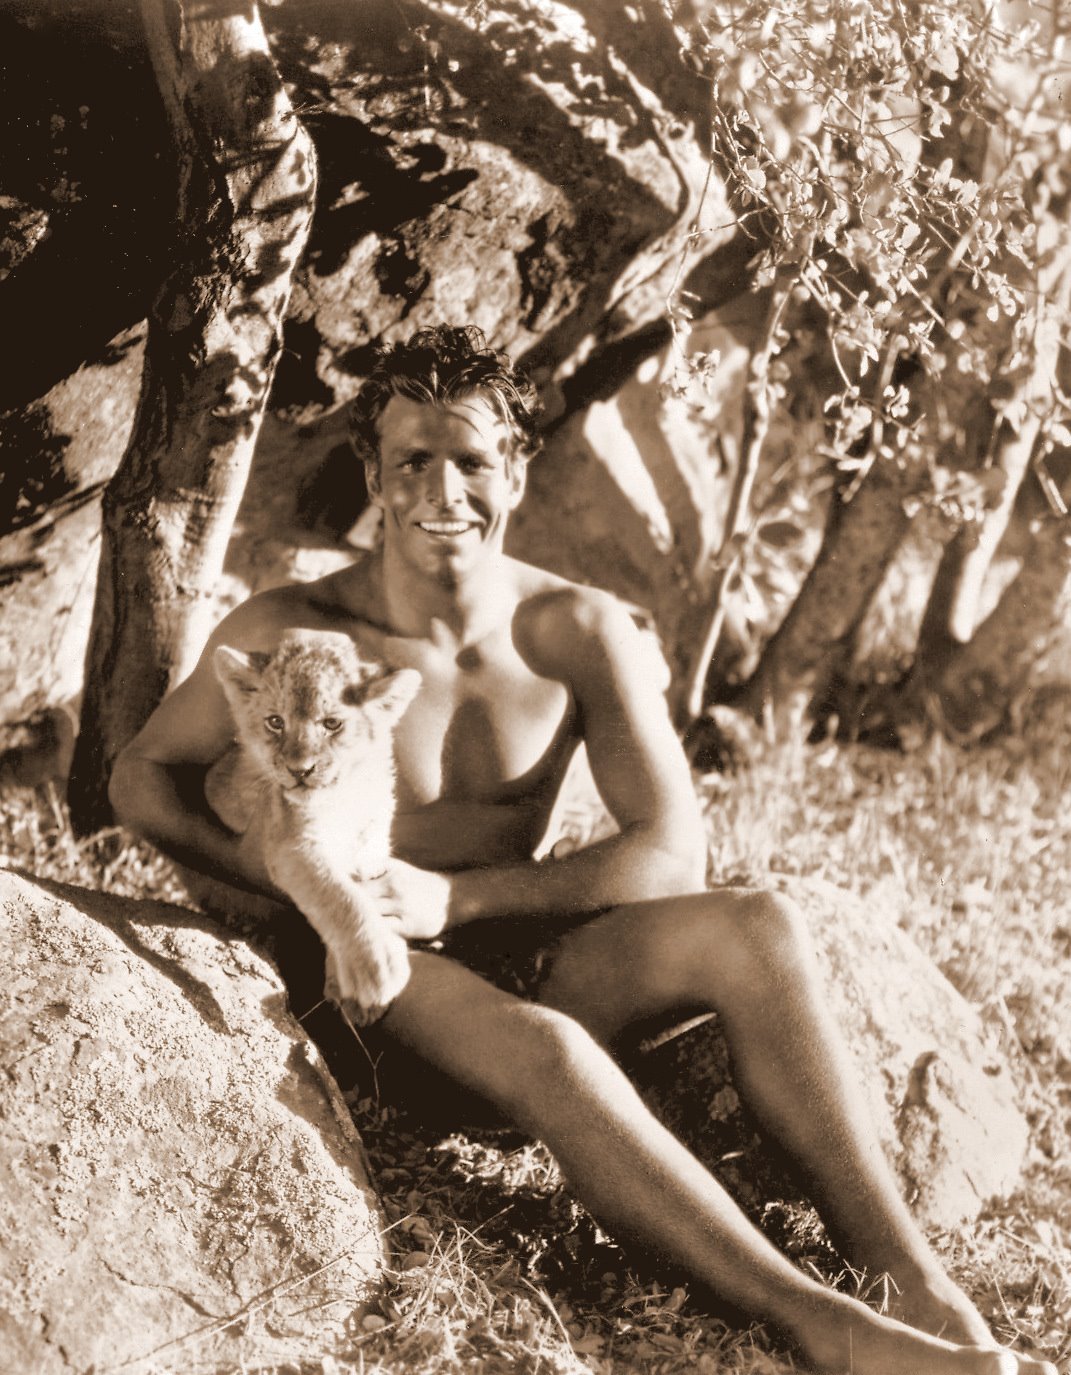 BUSTER CRABBE BARE CHESTED AND BEAUTIFUL: As Tarzan, King of the Jungle, Fl...